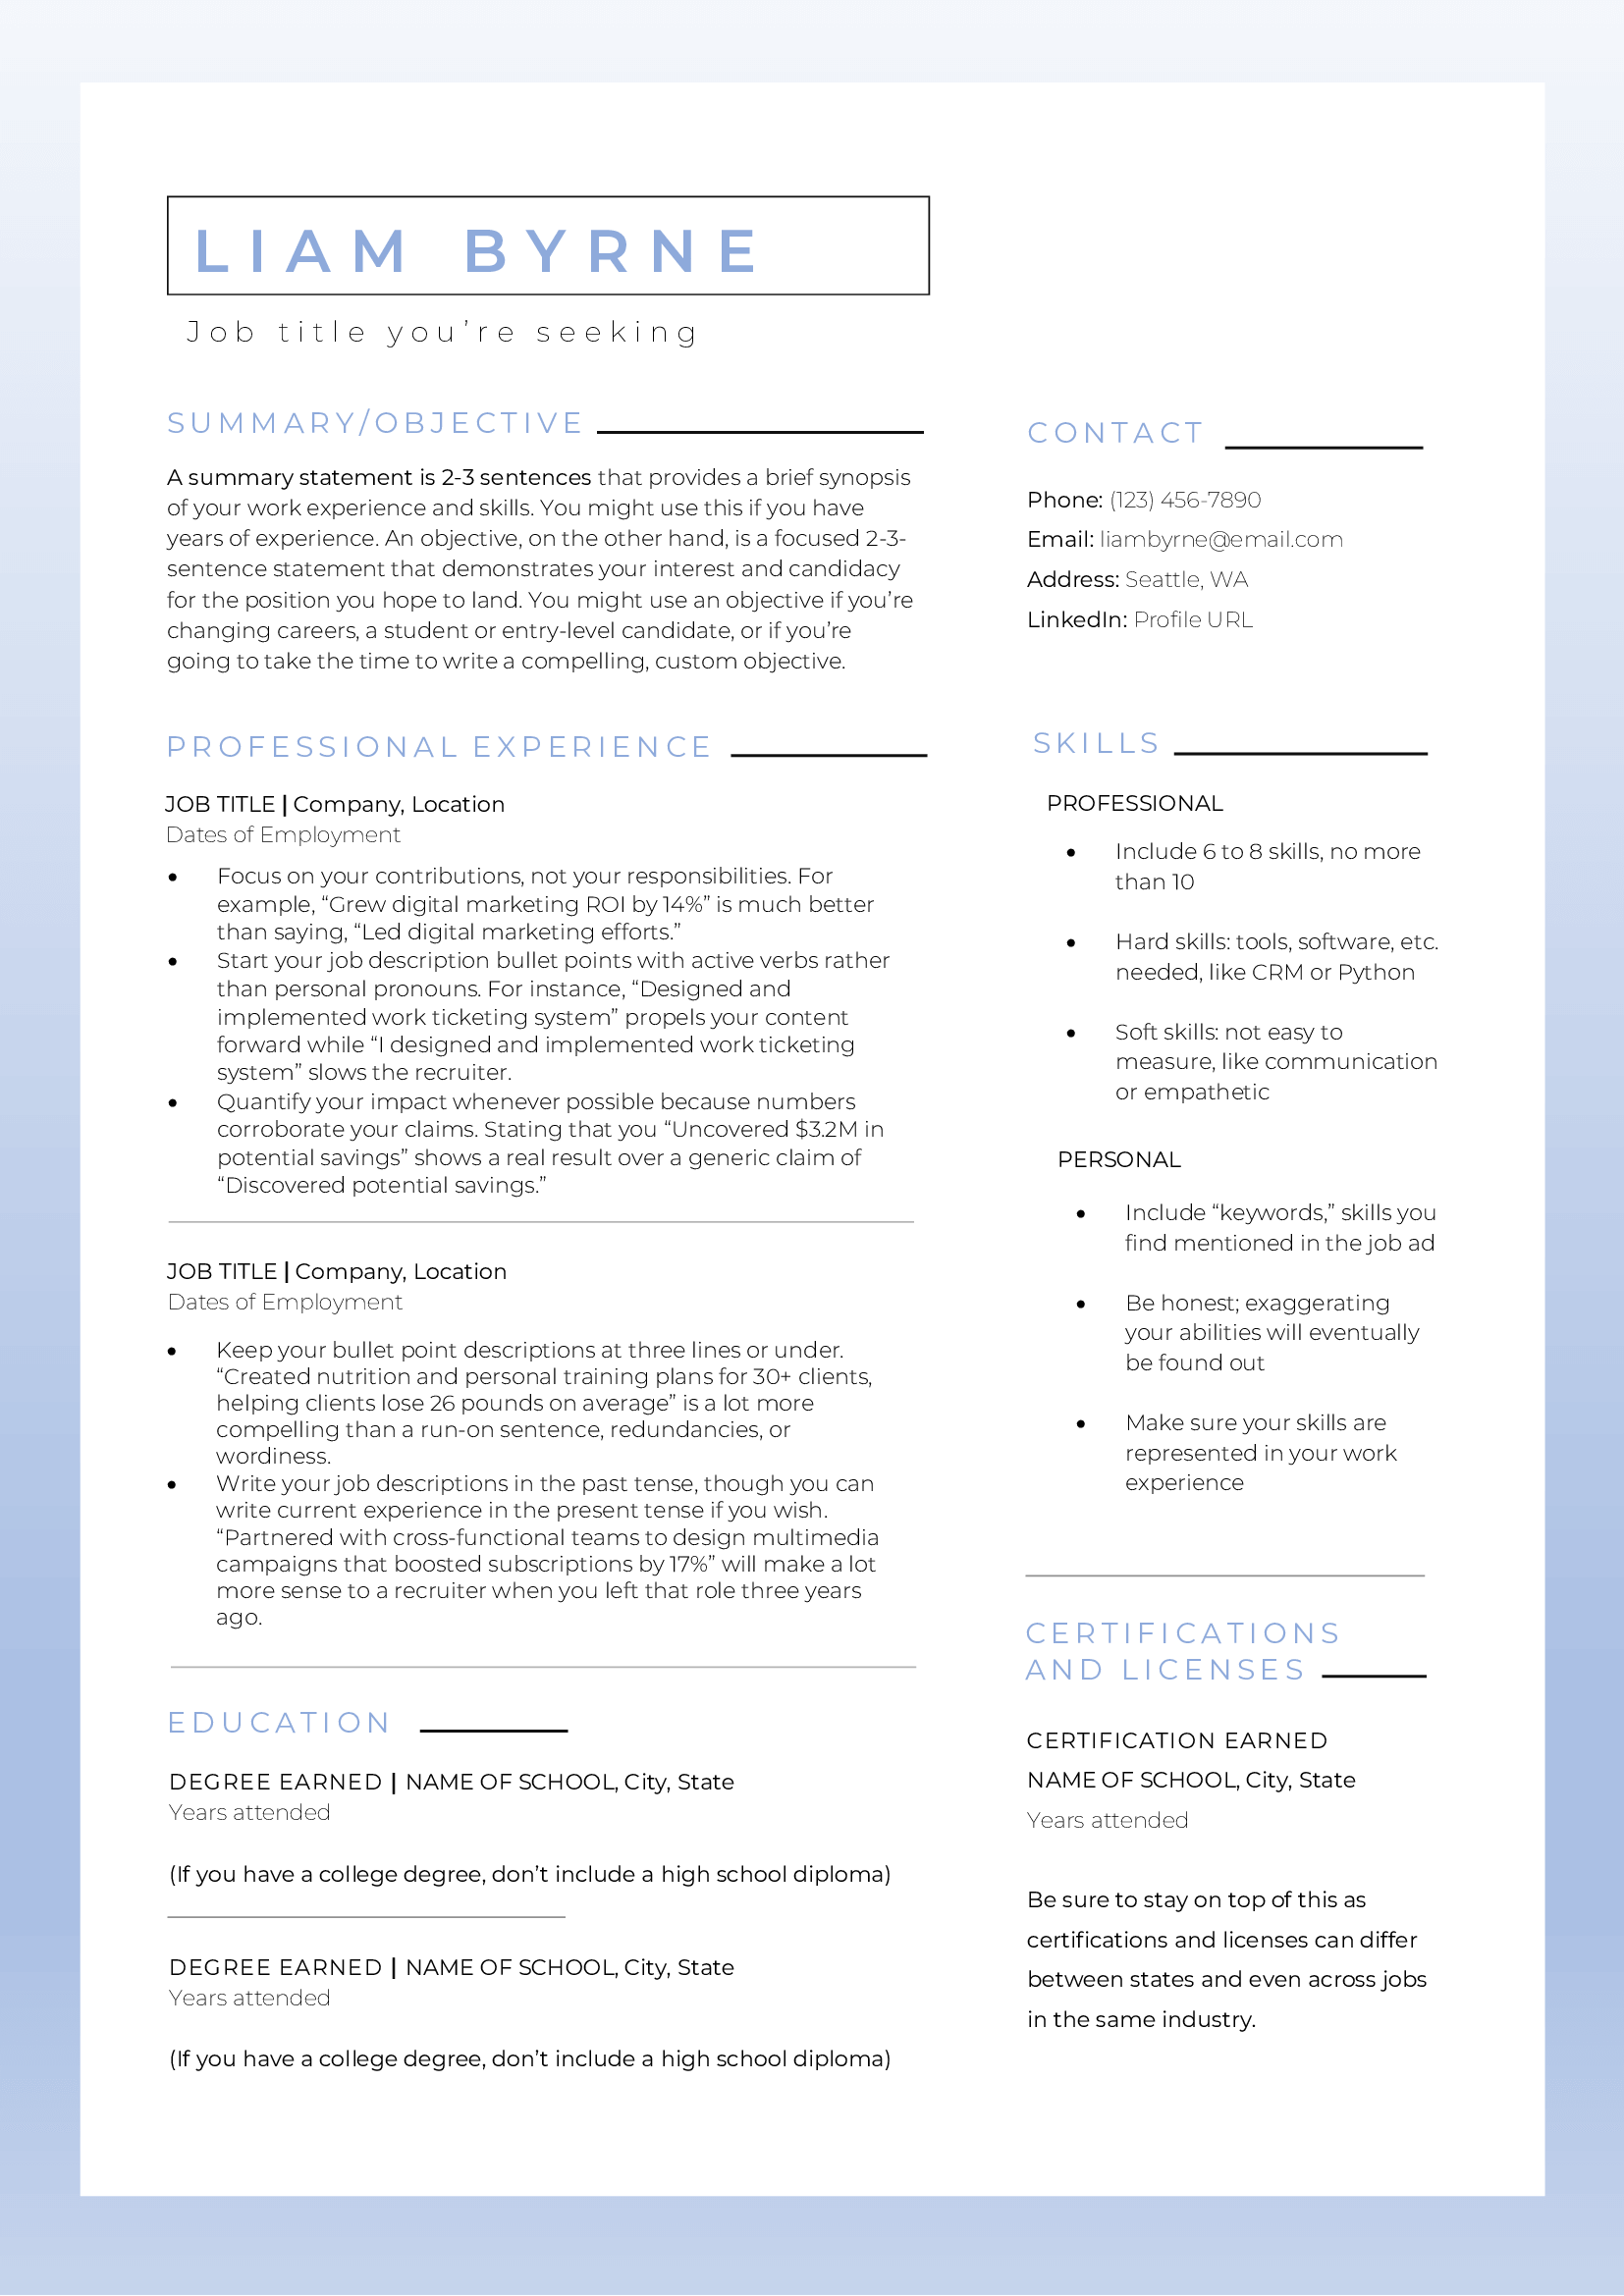 Word resume template for executive